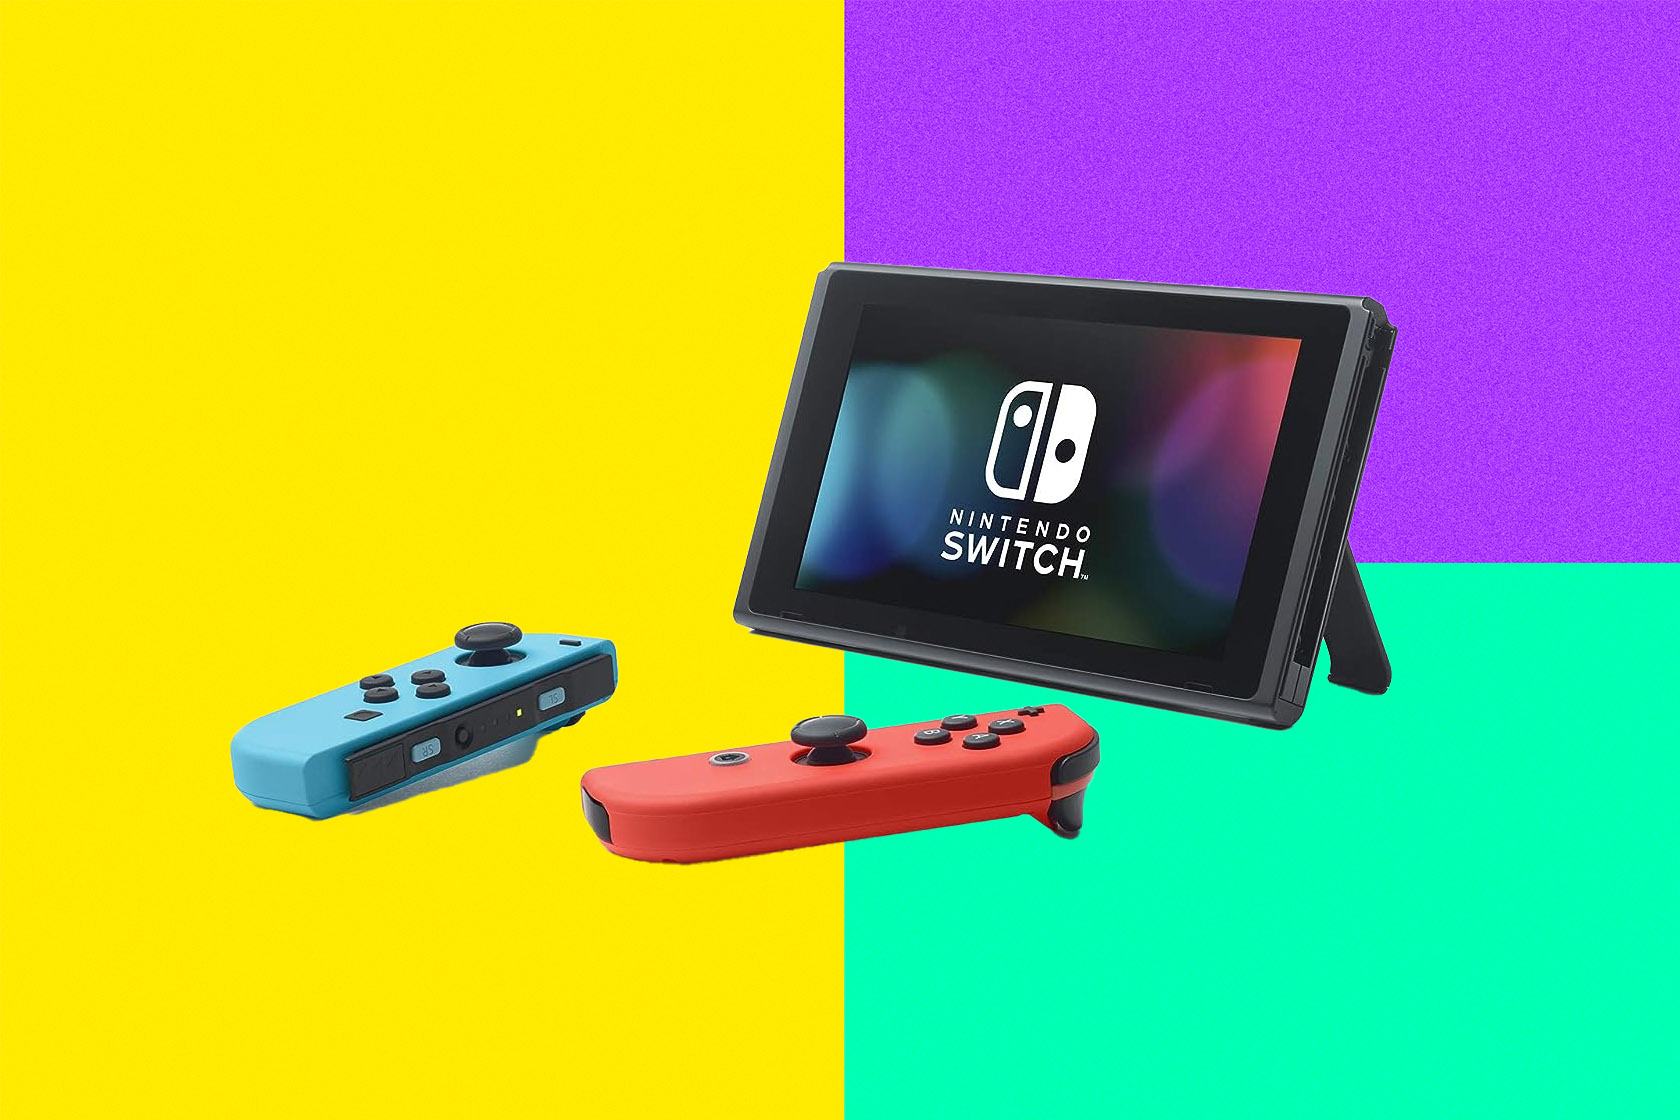 Black Friday 2022: Save up to 50% on the best Nintendo Switch games